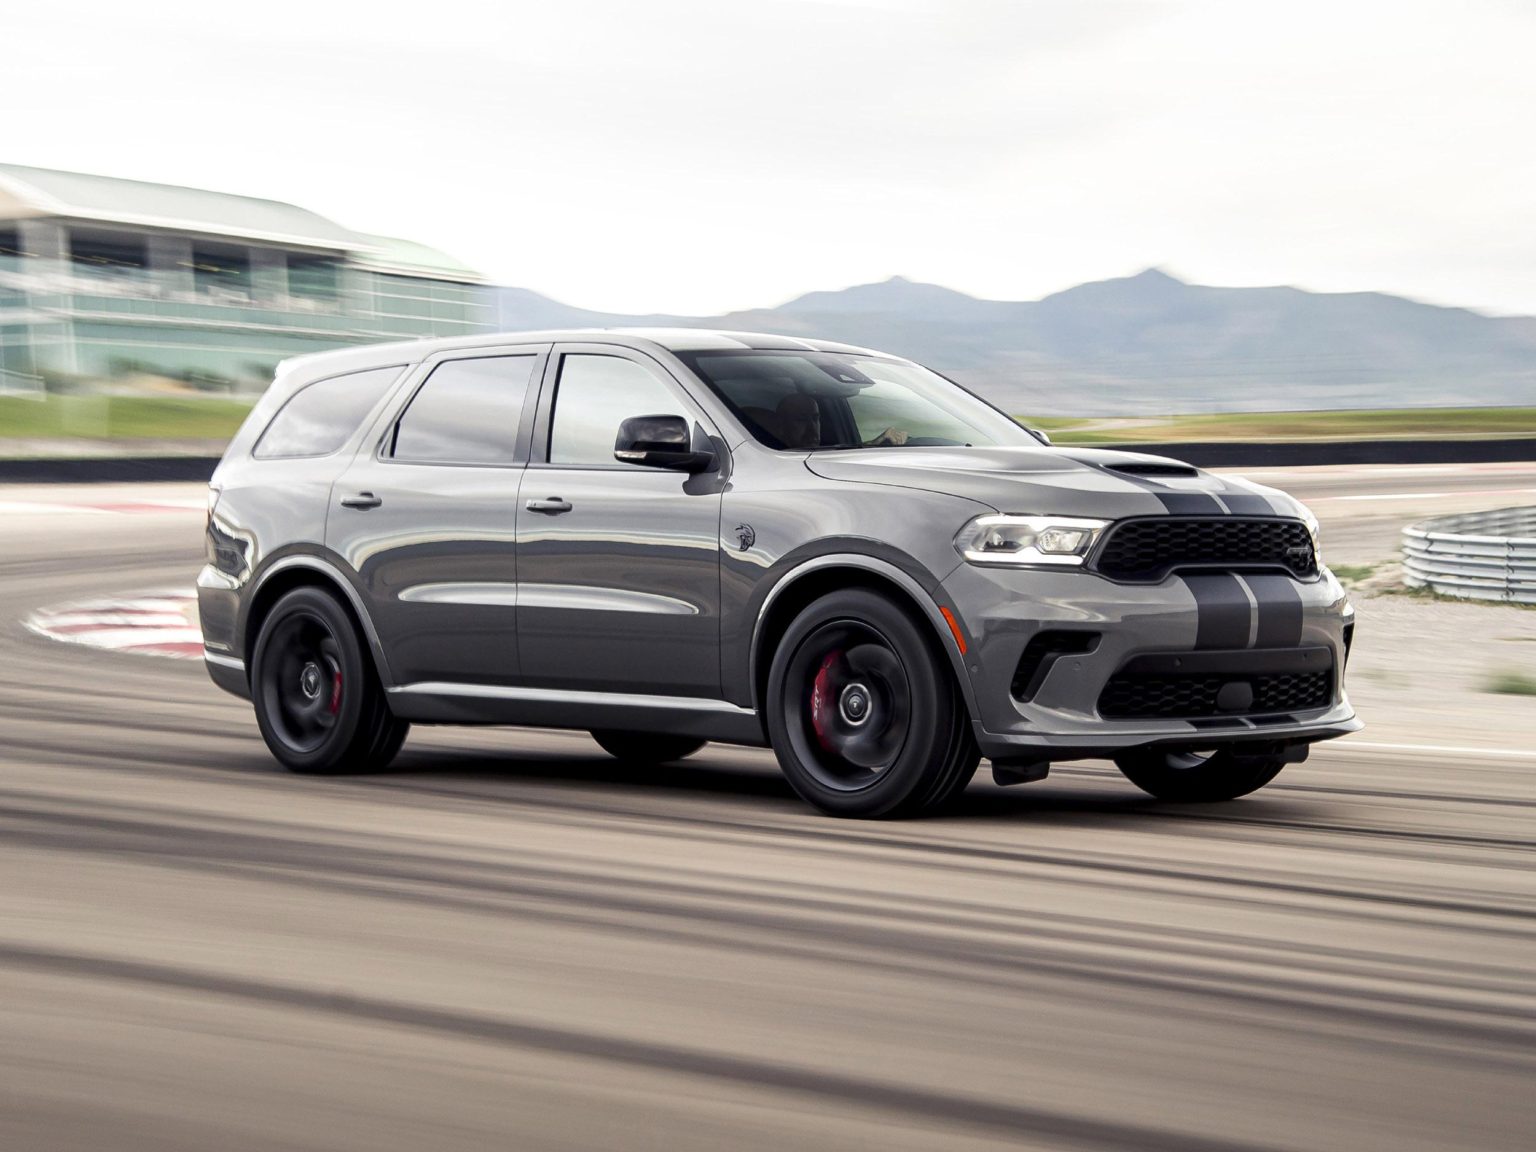 The 2021 Dodge Durango SRT Hellcat is a new addition to the lineup.